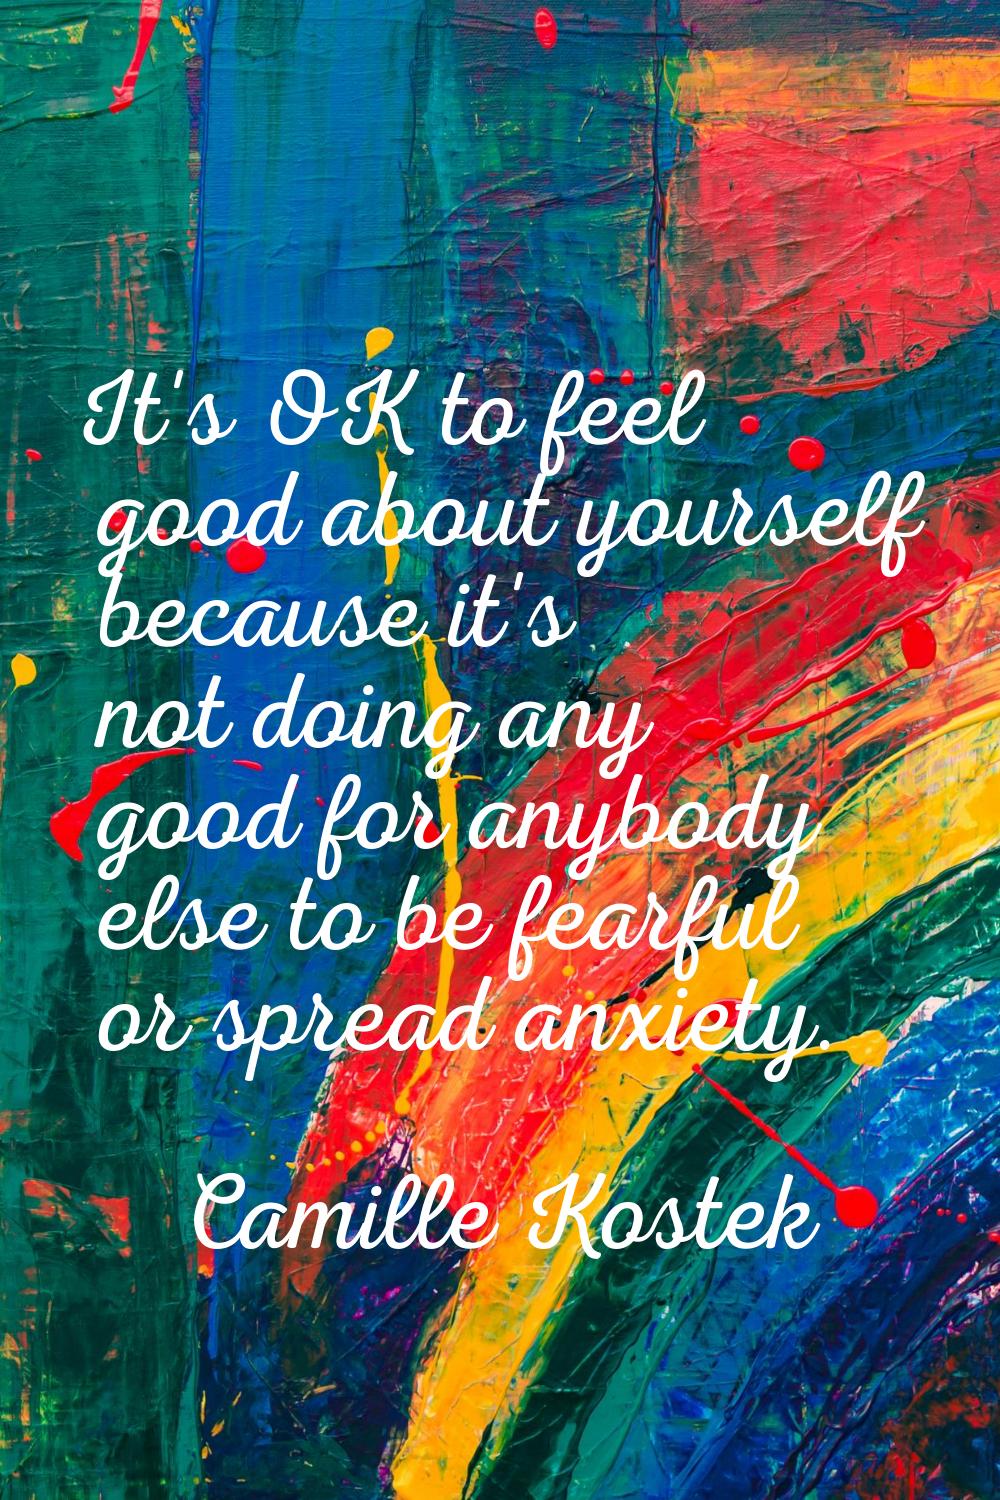 It's OK to feel good about yourself because it's not doing any good for anybody else to be fearful 